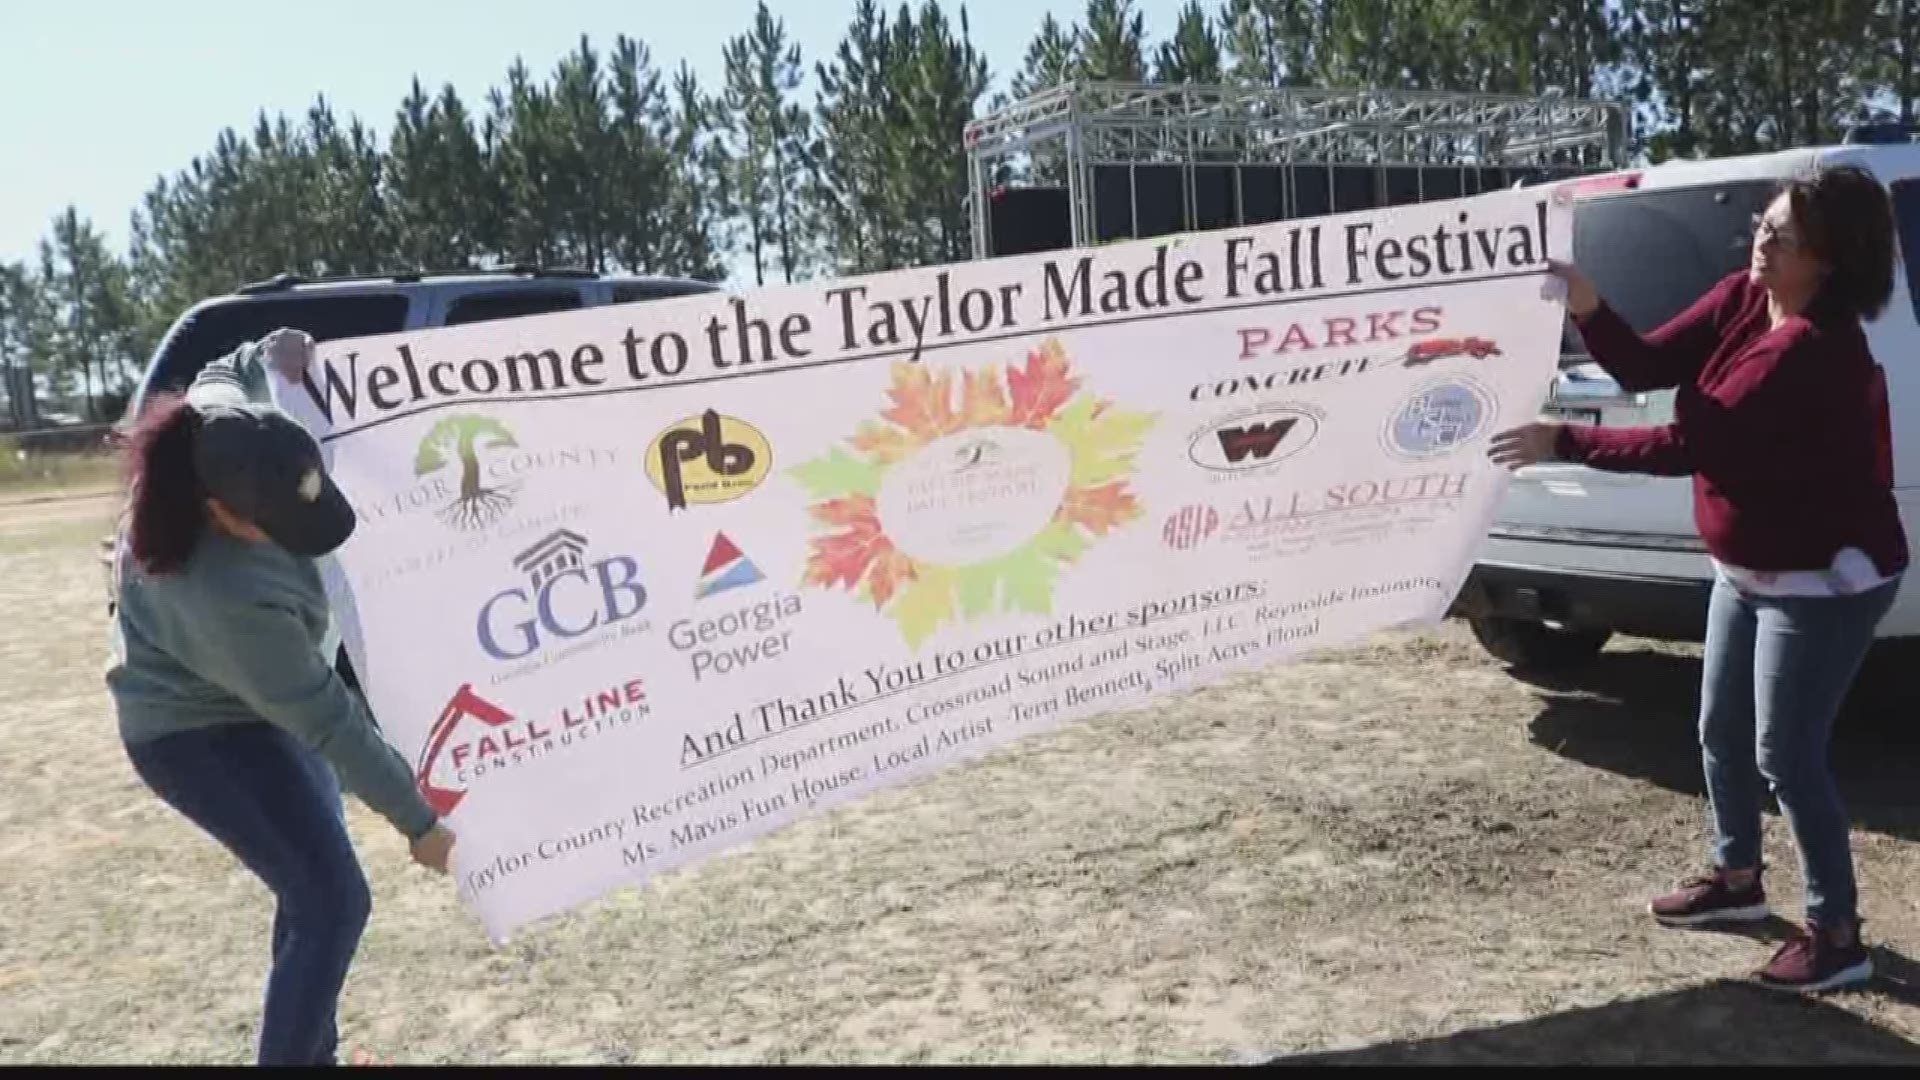 The county originally known for its annual Georgia Strawberry Festival is switching gears to celebrate its sand industry.